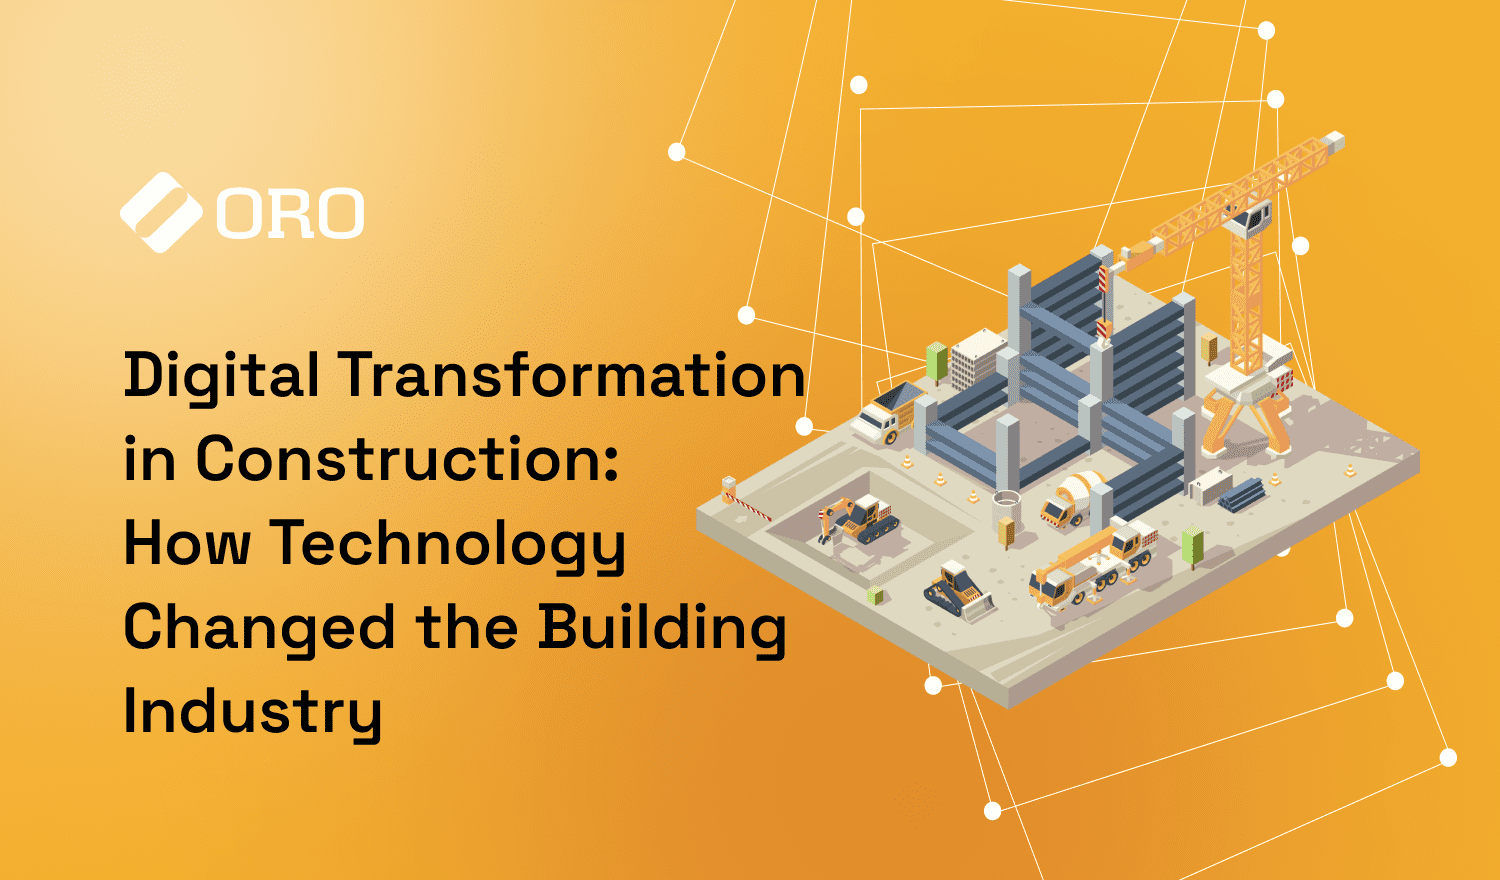 Digital Transformation in the Construction Industry Challenges | OroCommerce